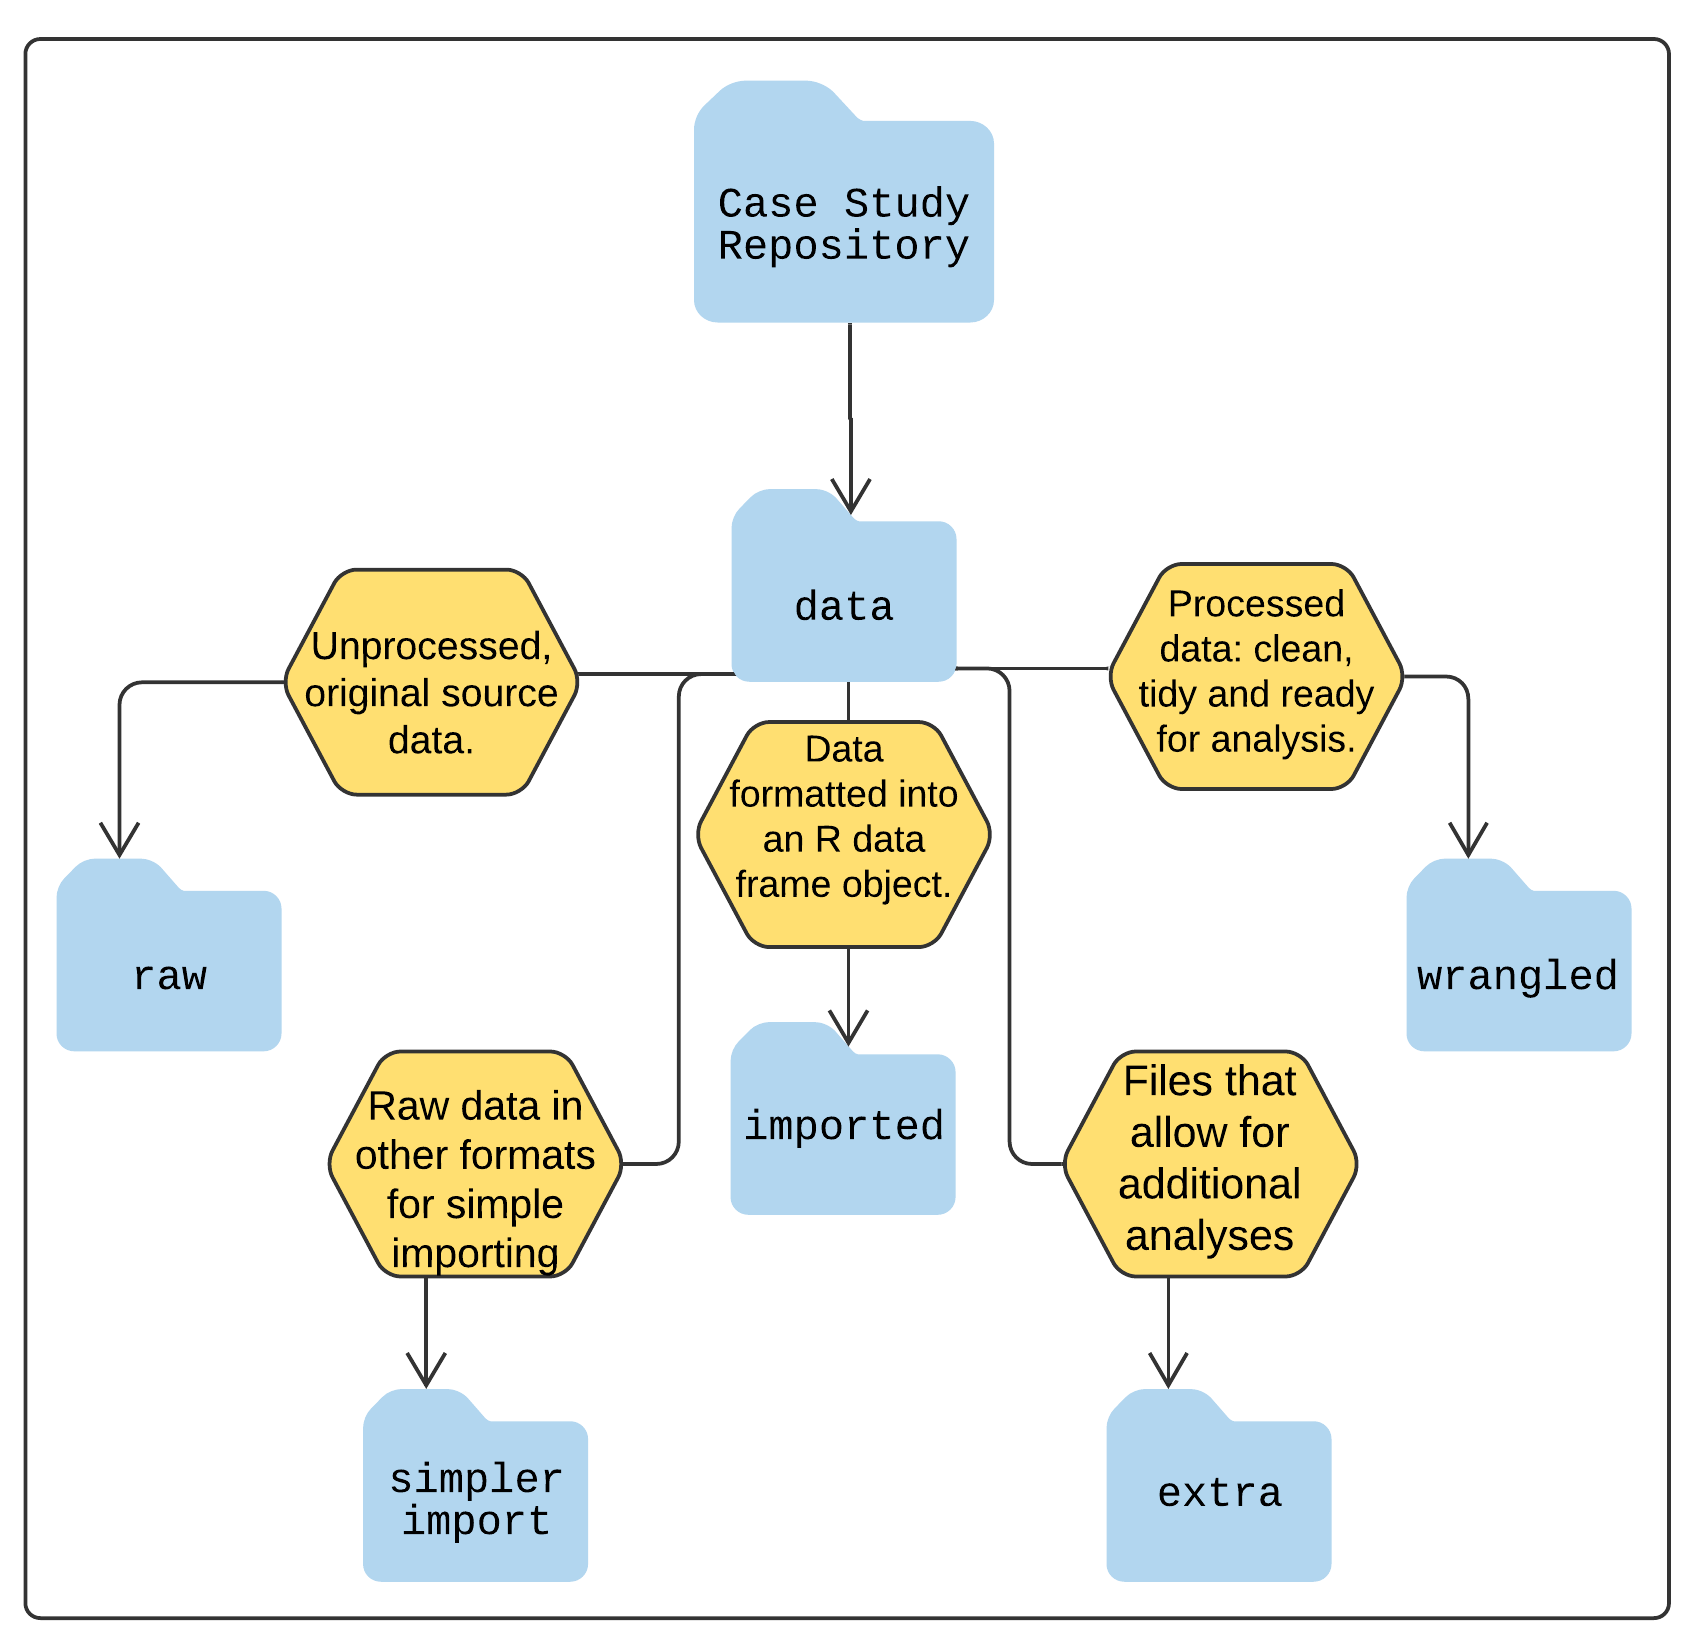 Diagram explaining the case study data folder structure and how data is categorized into different sub-folders